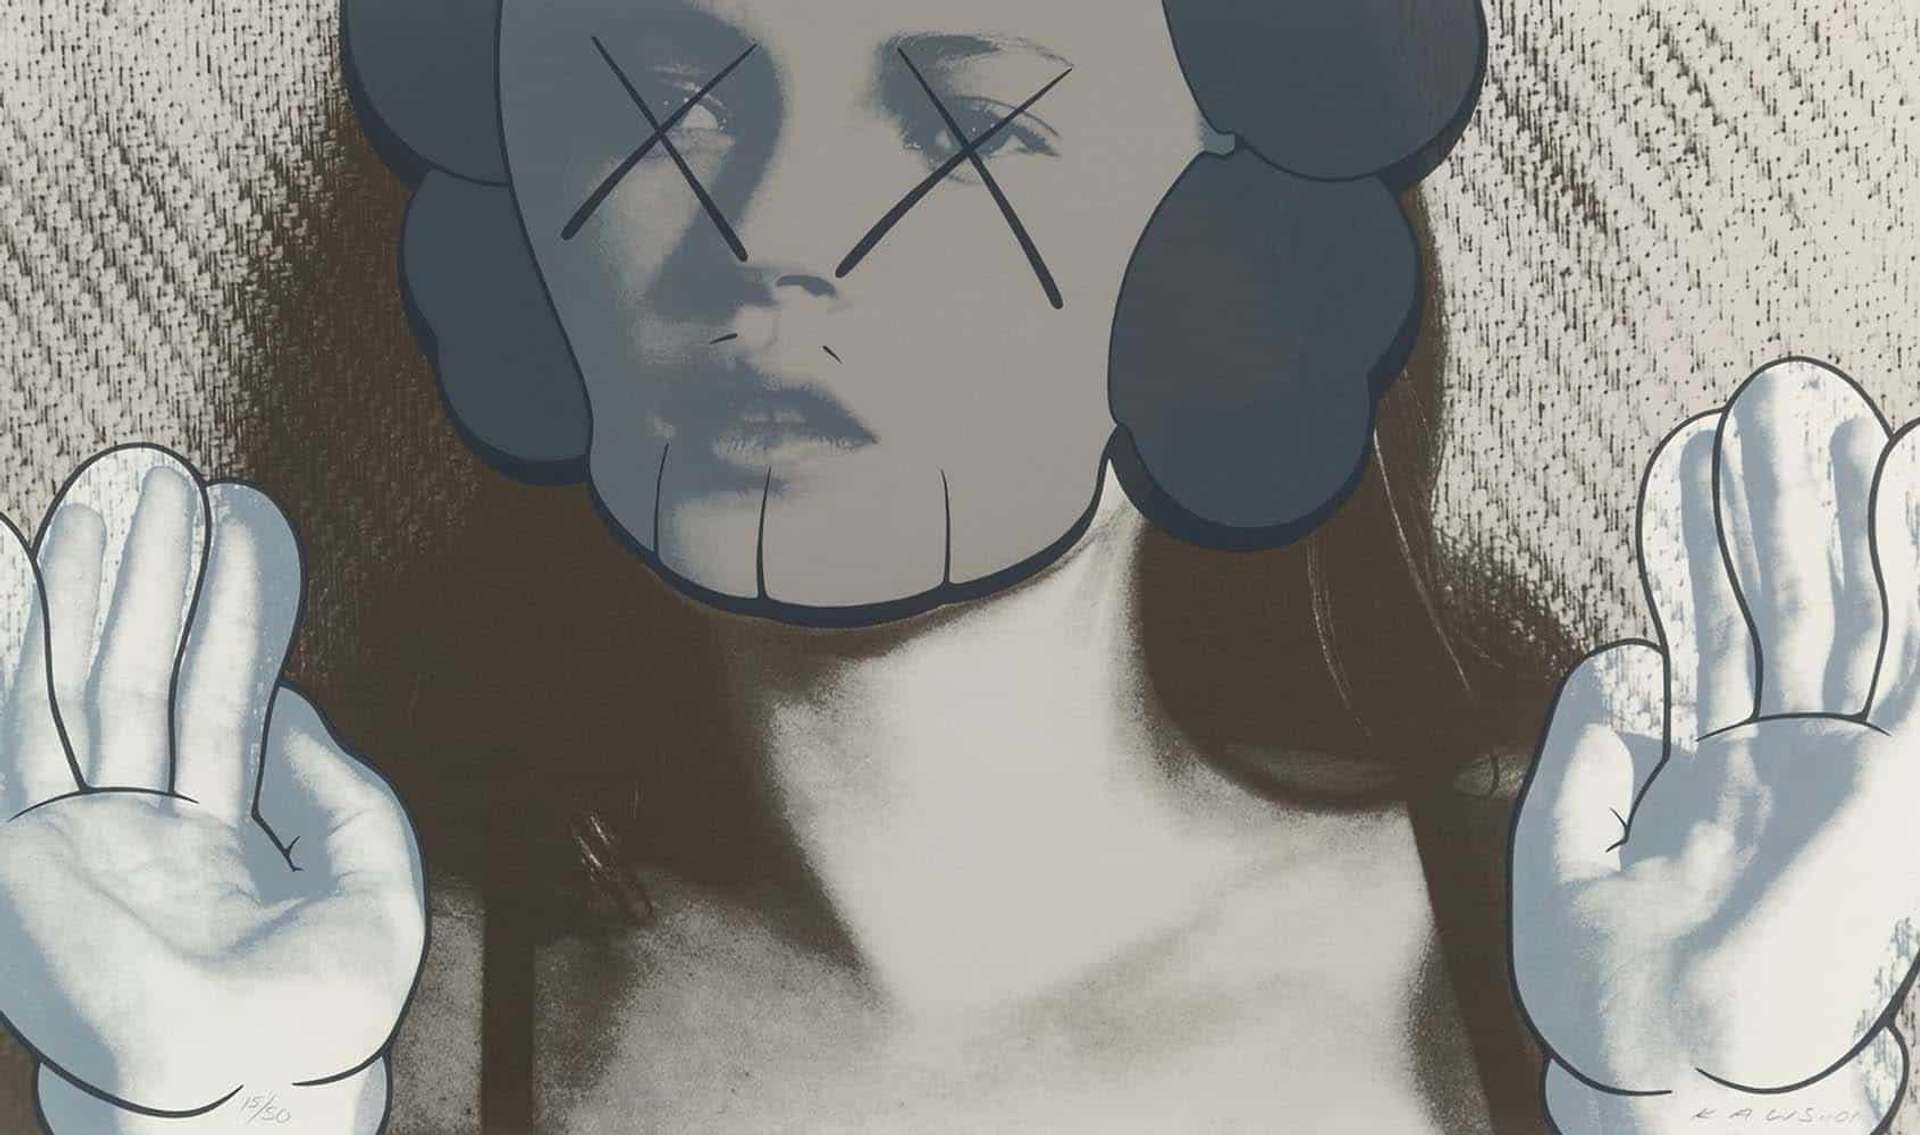 The print depicts the famous supermodel, Kate Moss. Moss’ image is appropriated by KAWS and the artist transforms the model into a cartoon by giving her a skull and crossbone head and gloved hands.